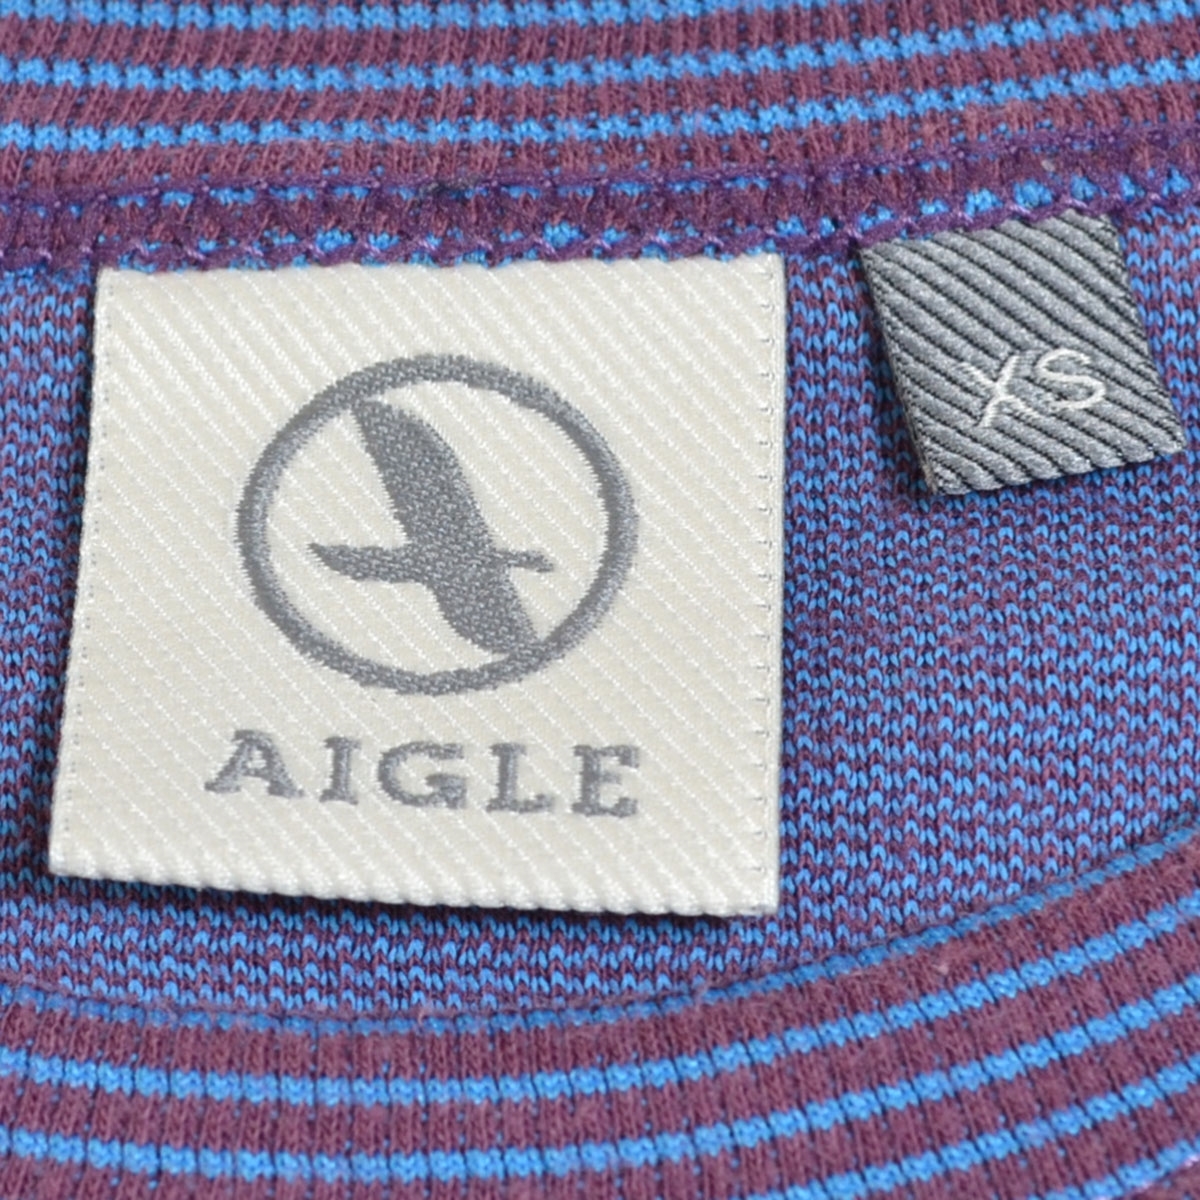 *382848 AIGLE Aigle * long sleeve T shirt cut and sewn size XS lady's made in Japan purple blue border 